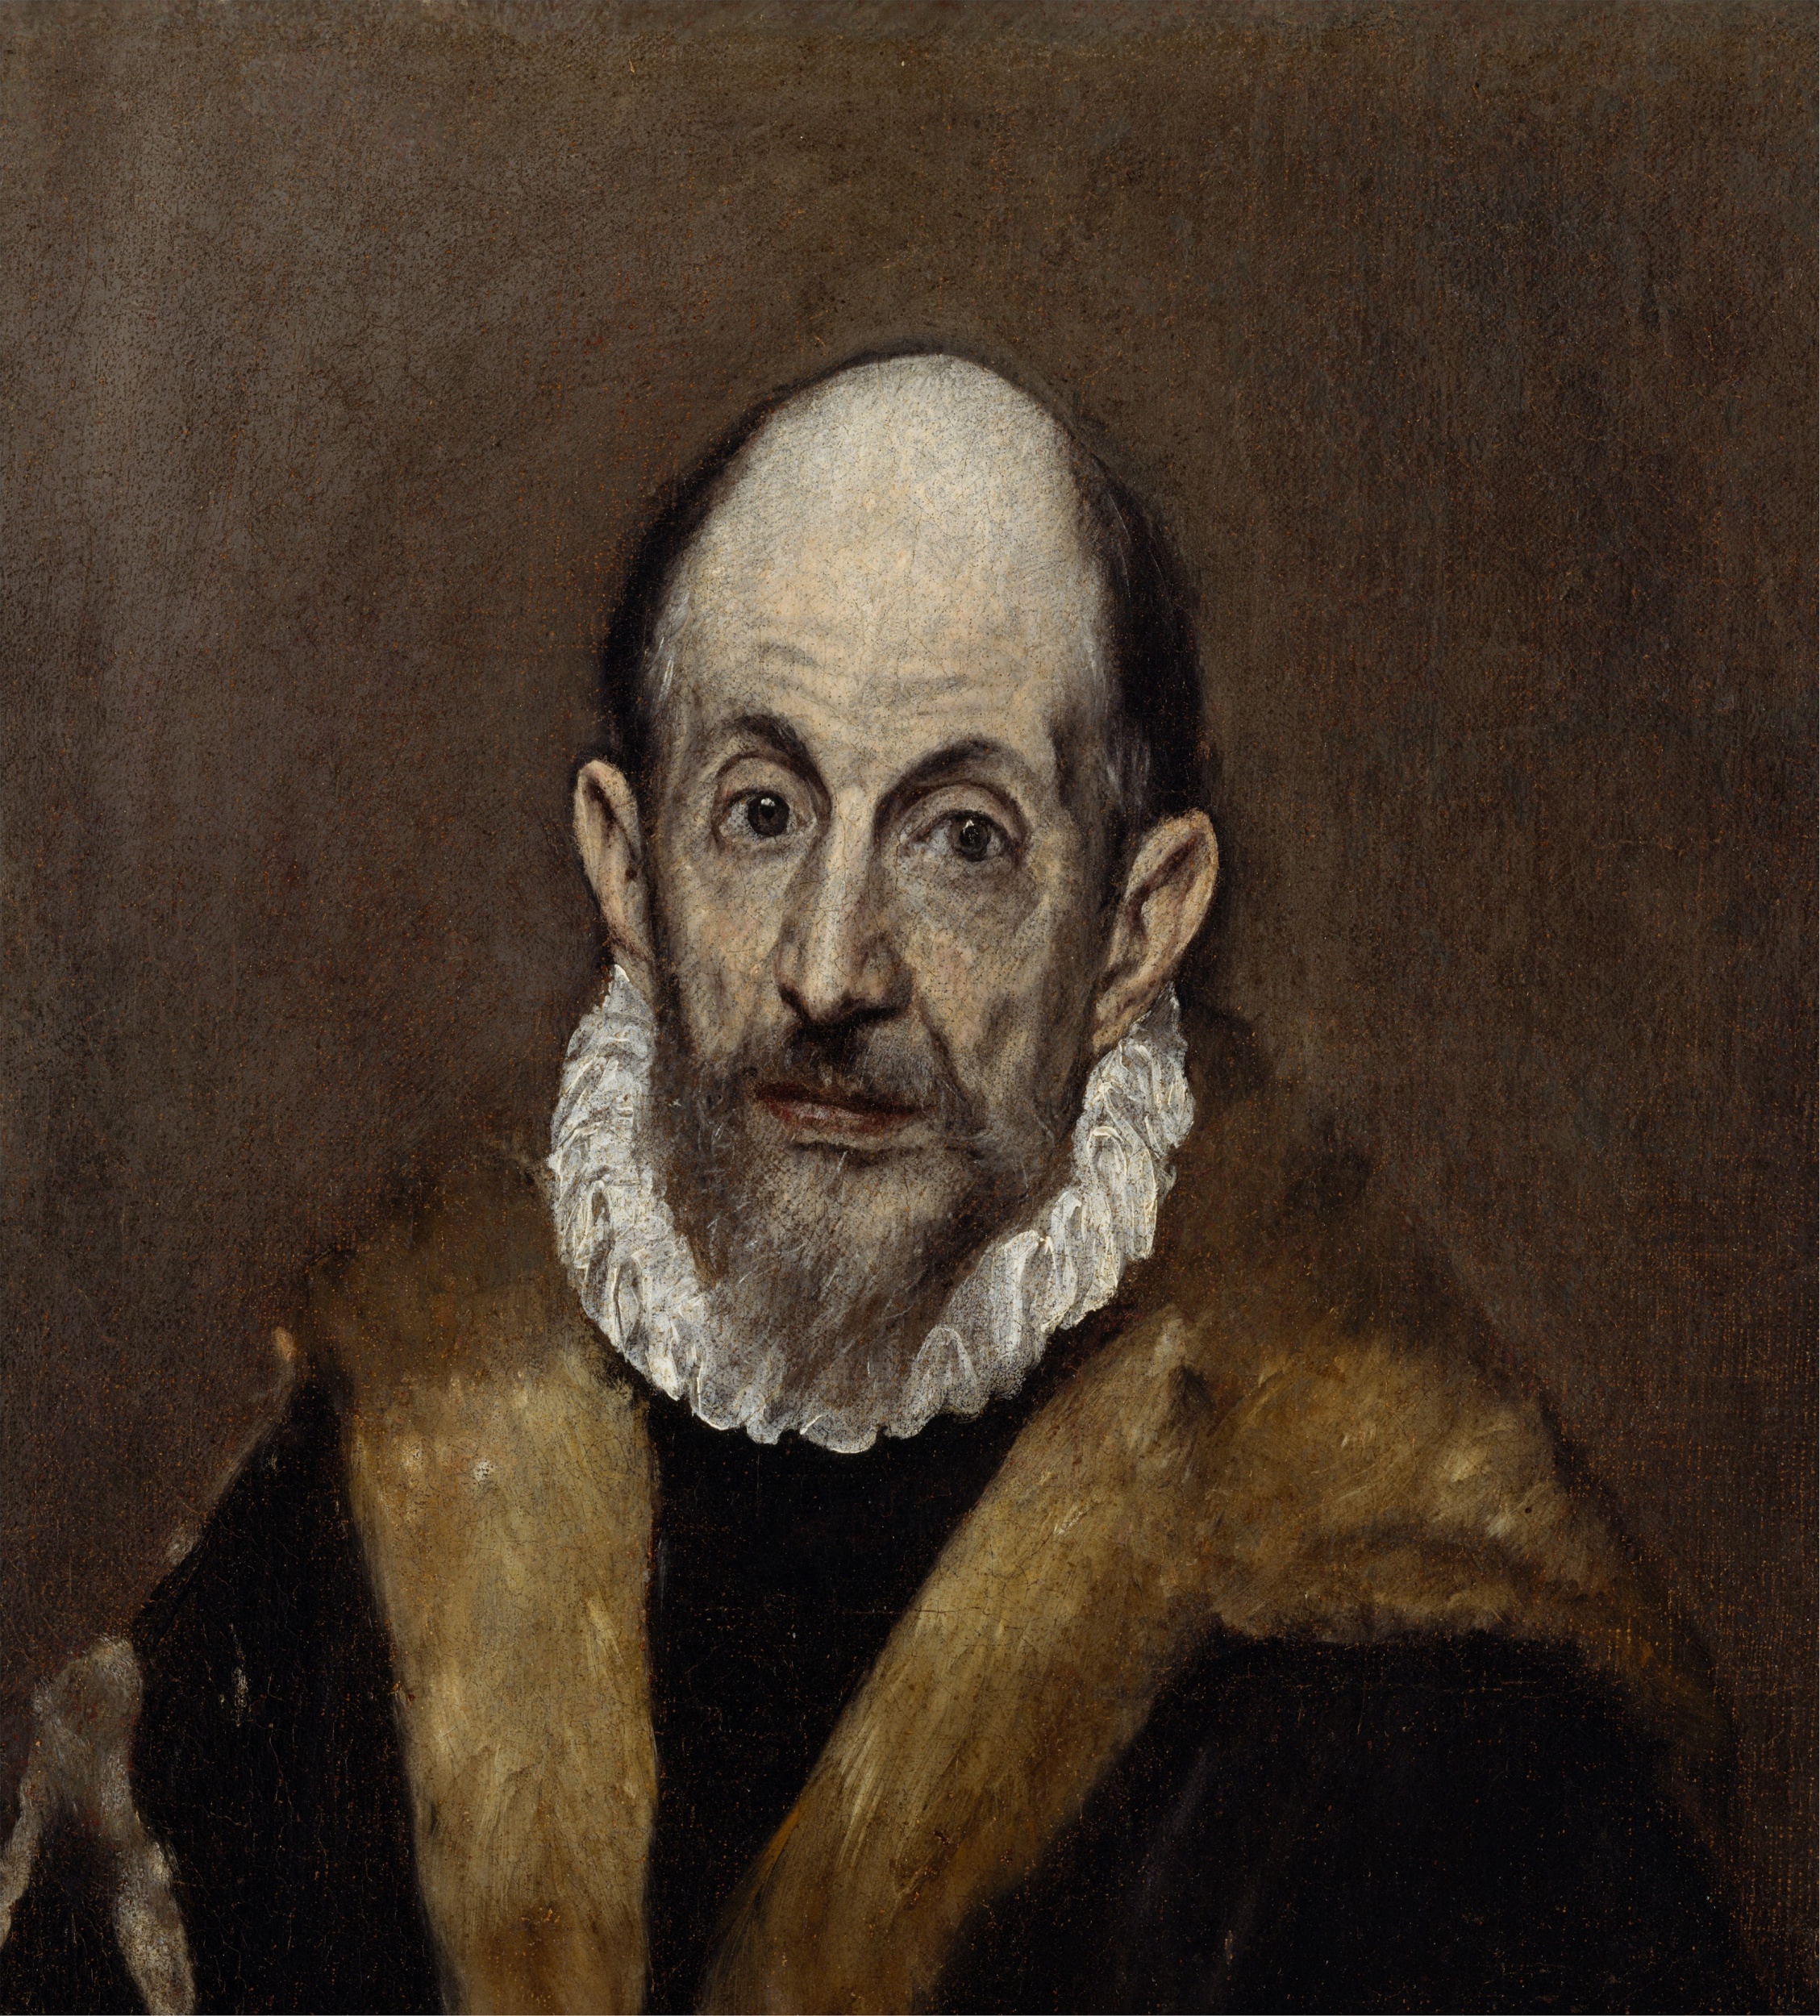 *El Greco, Portrait of an old man, ca. 1595-1600, The Metropolitain Museum, New York*